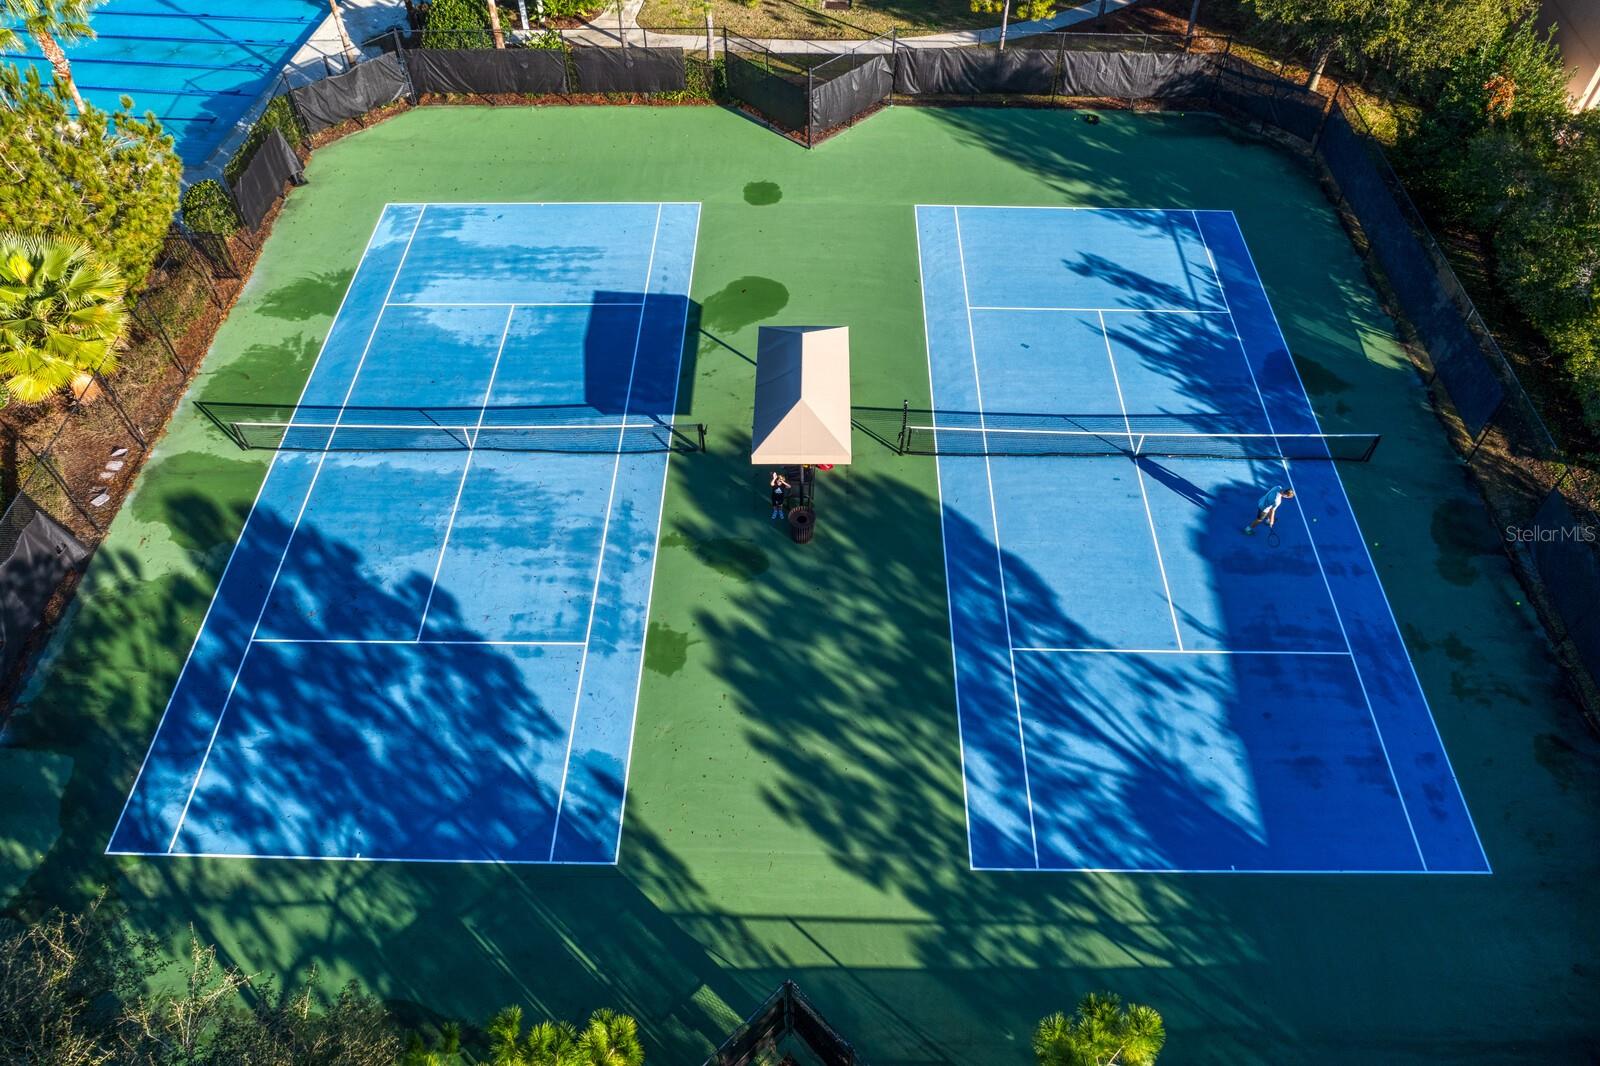 Two tennis courts open dawn to dusk.